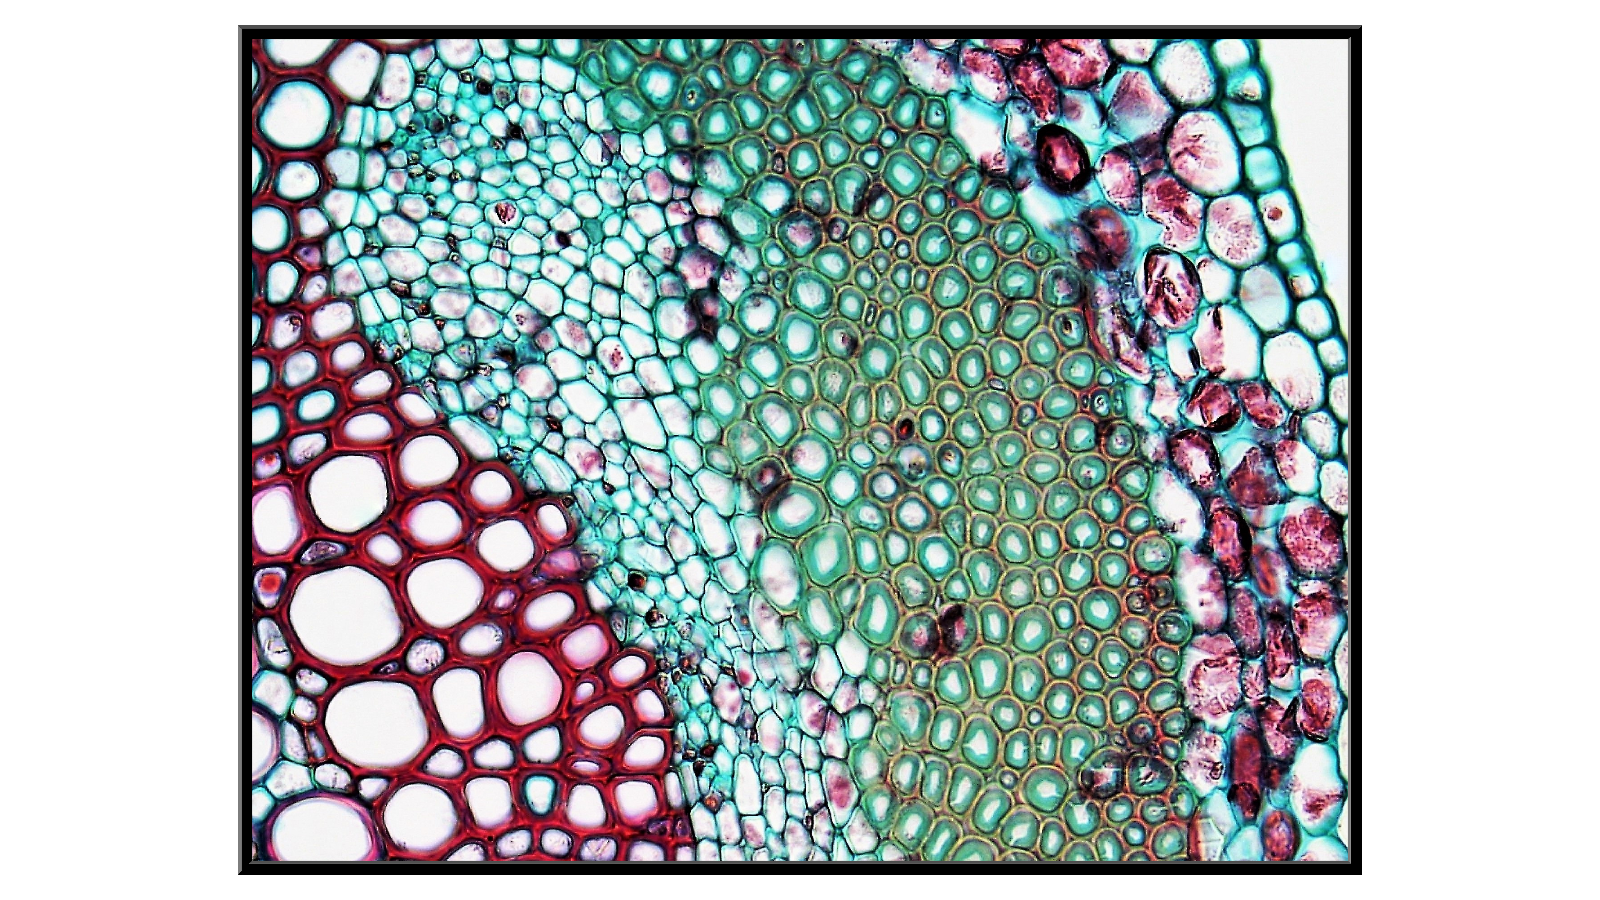 Cross-section of a clover stem - 2